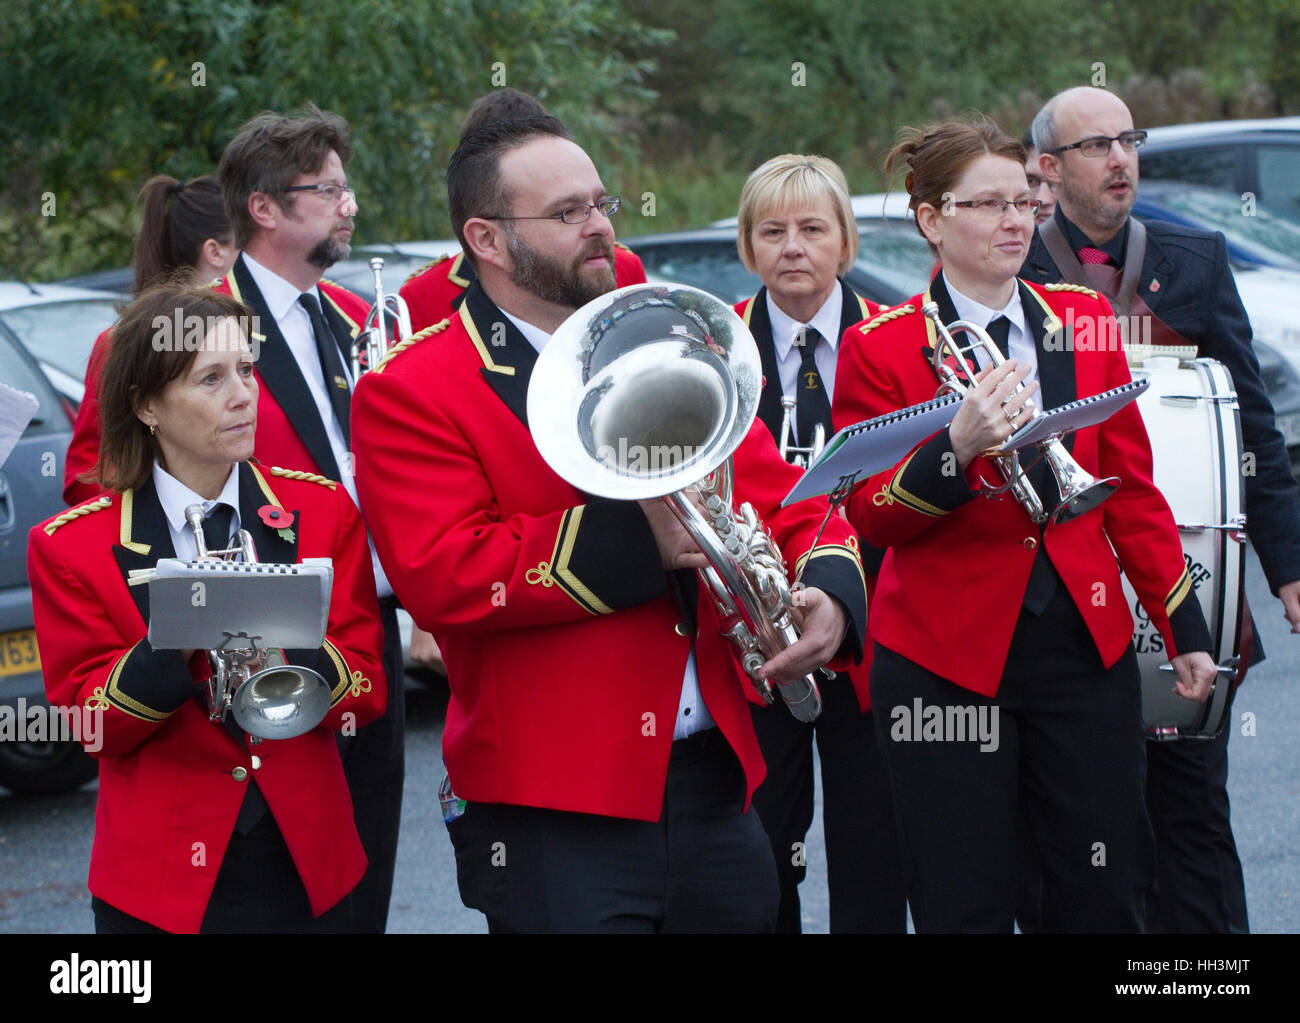 Members of the Woodford Excelsior brass band preparing for a Remembrance Day parade Stock Photo